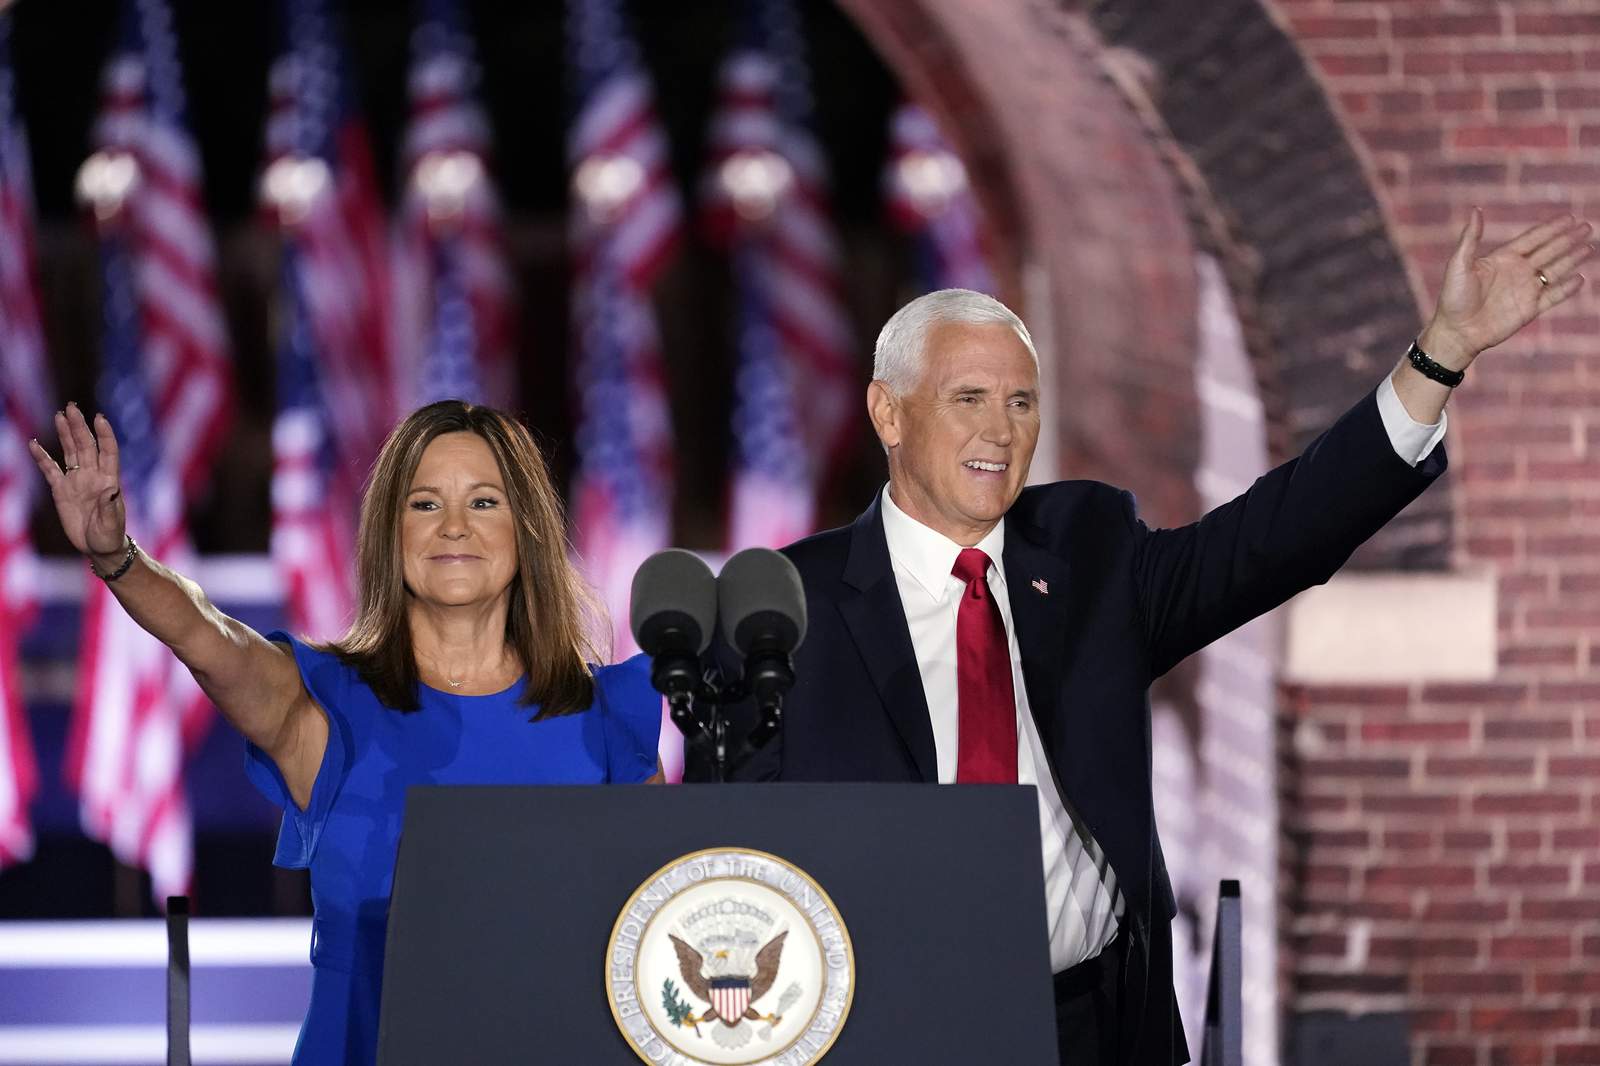 GOP Convention takeaways: Pence pounces while crises swirl